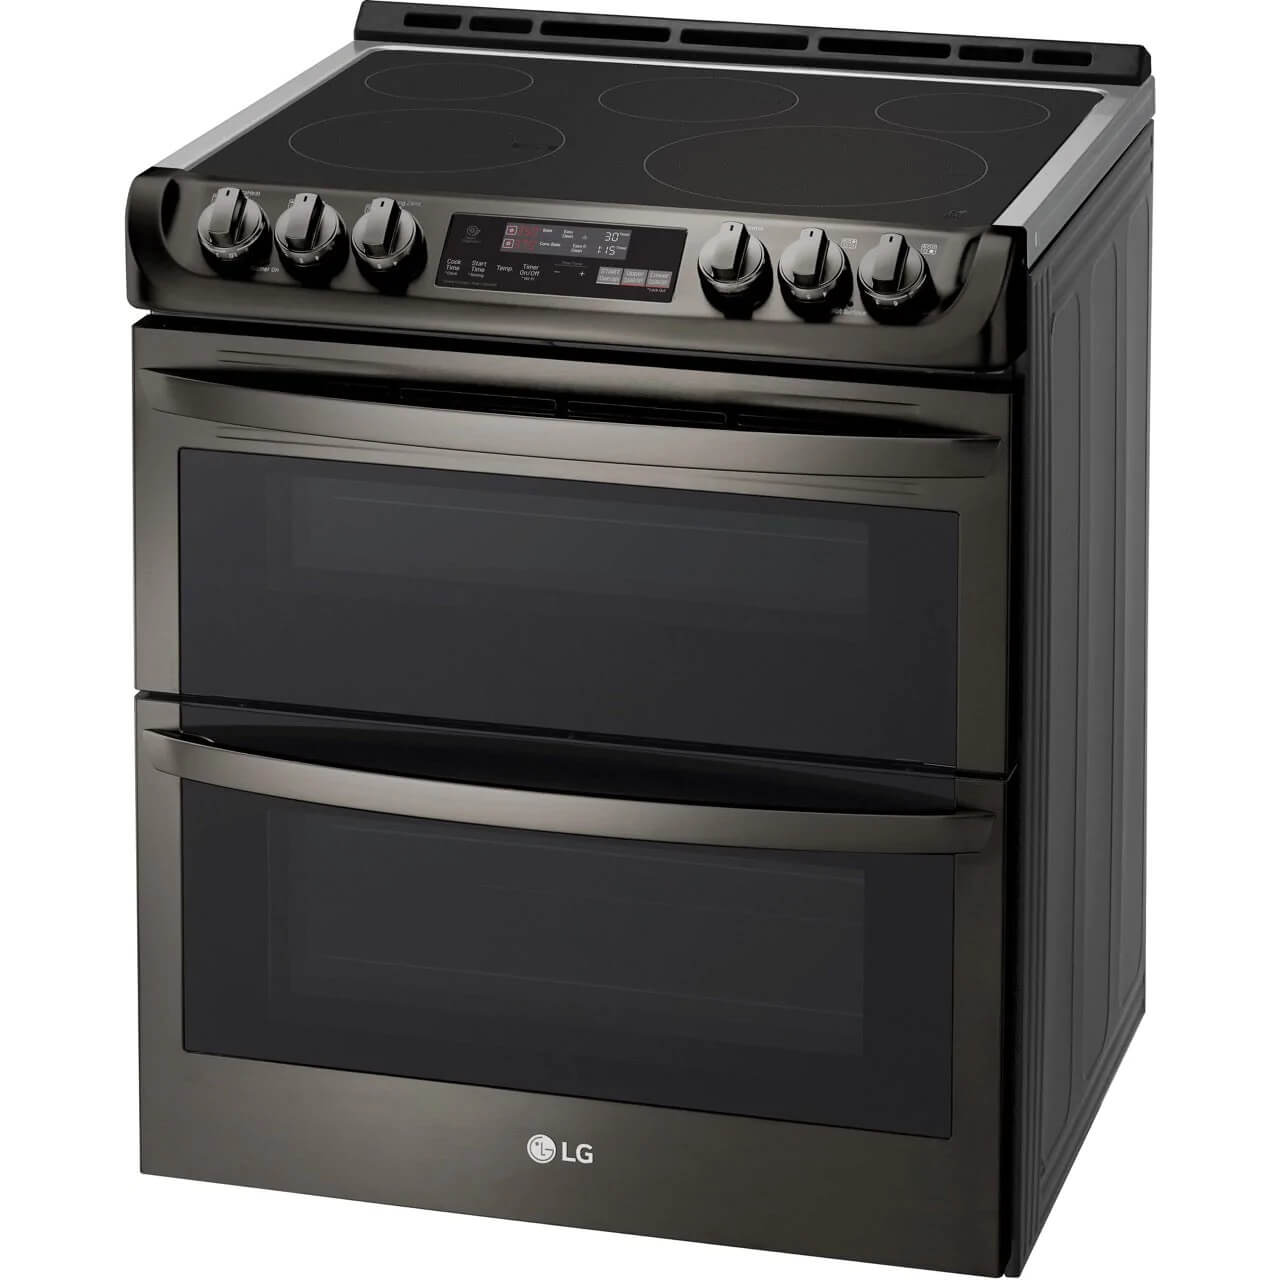 LG Appliances Range Electronics 7.3-Cu. Ft. Electric Smart Range Double Oven with ProBake Convection and EasyClean®, Black Stainless Steel (LTE4815BD)